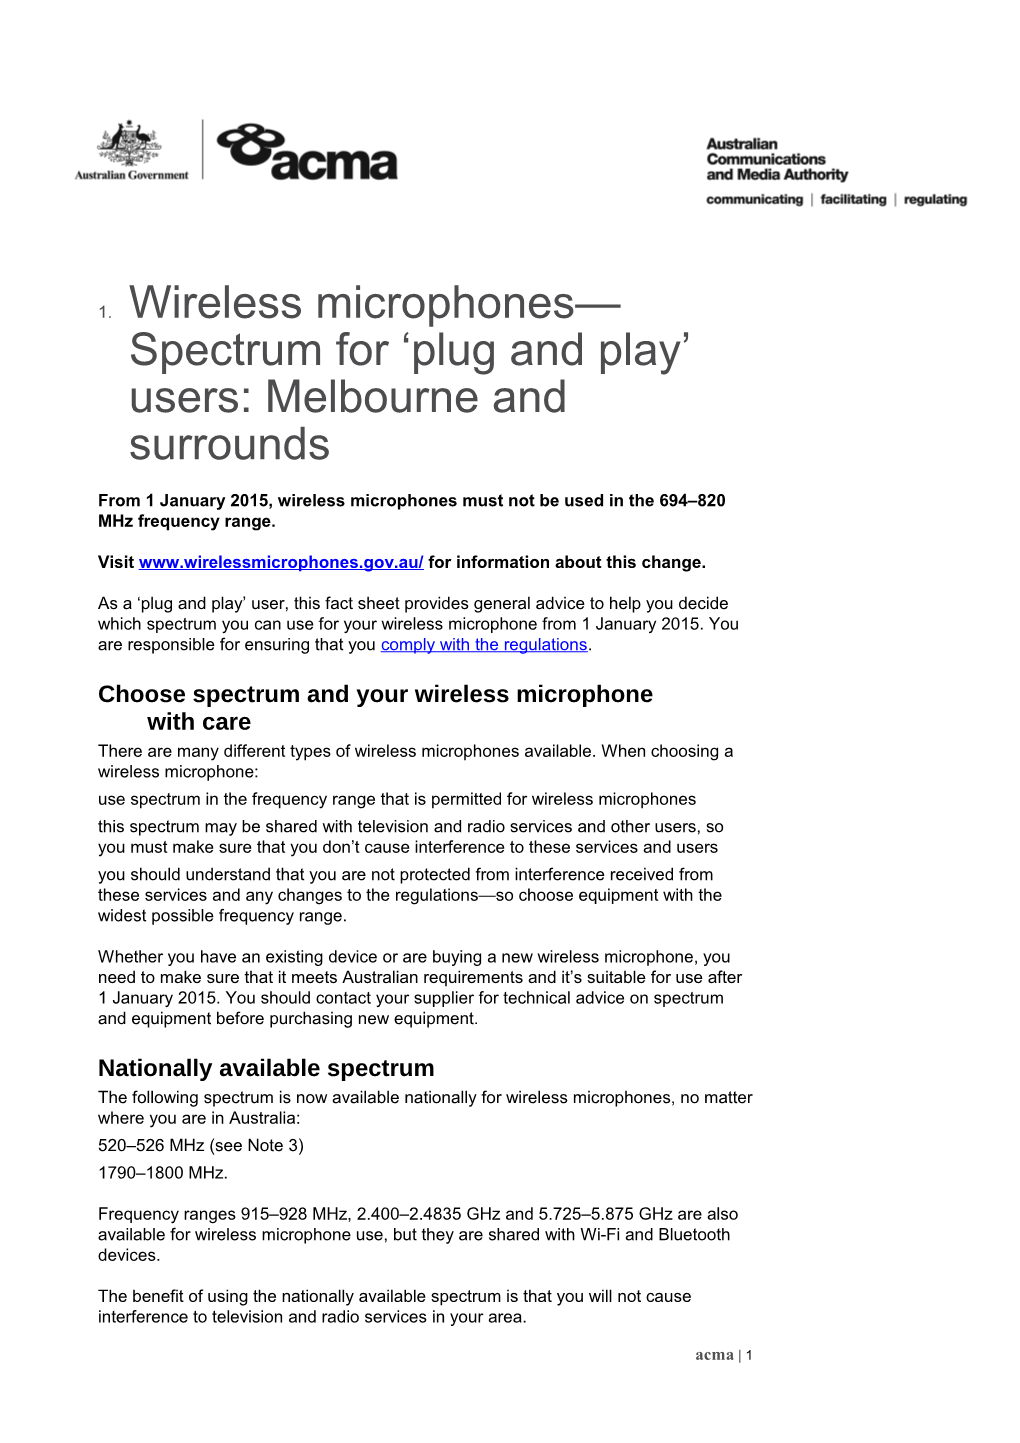 Wireless Microphones Spectrum for Plug and Play Users: Melbourne and Surrounds